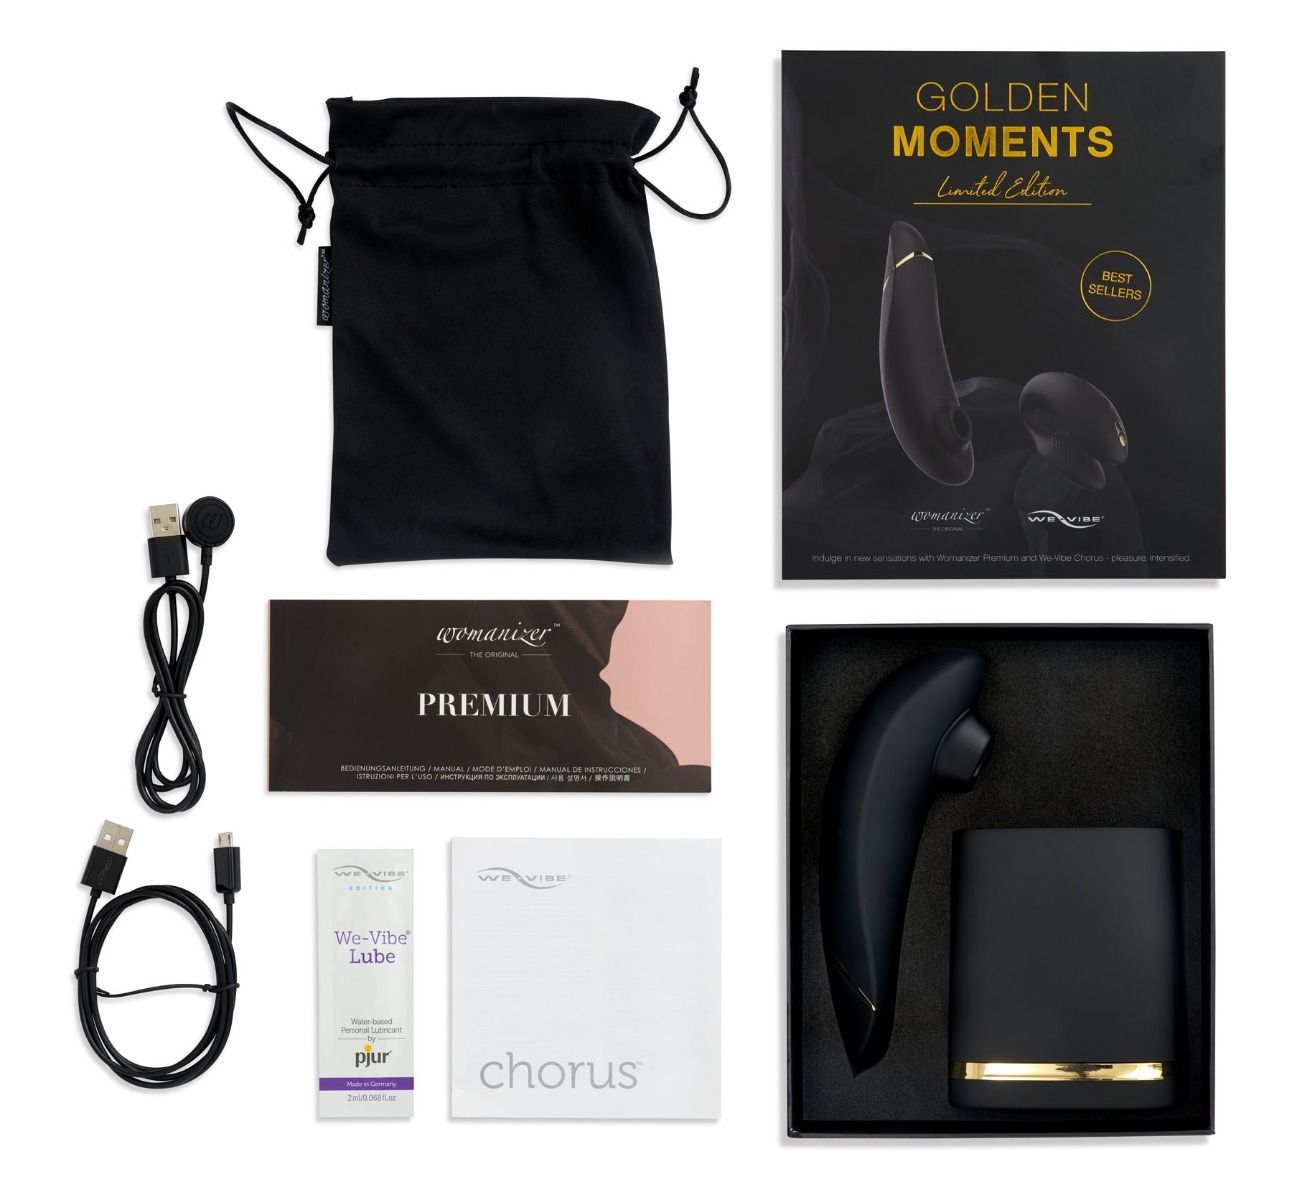 Womanizer & We-Vibe Golden Moments Limited Edition Gift Set - Thorn & Feather Sex Toy Canada